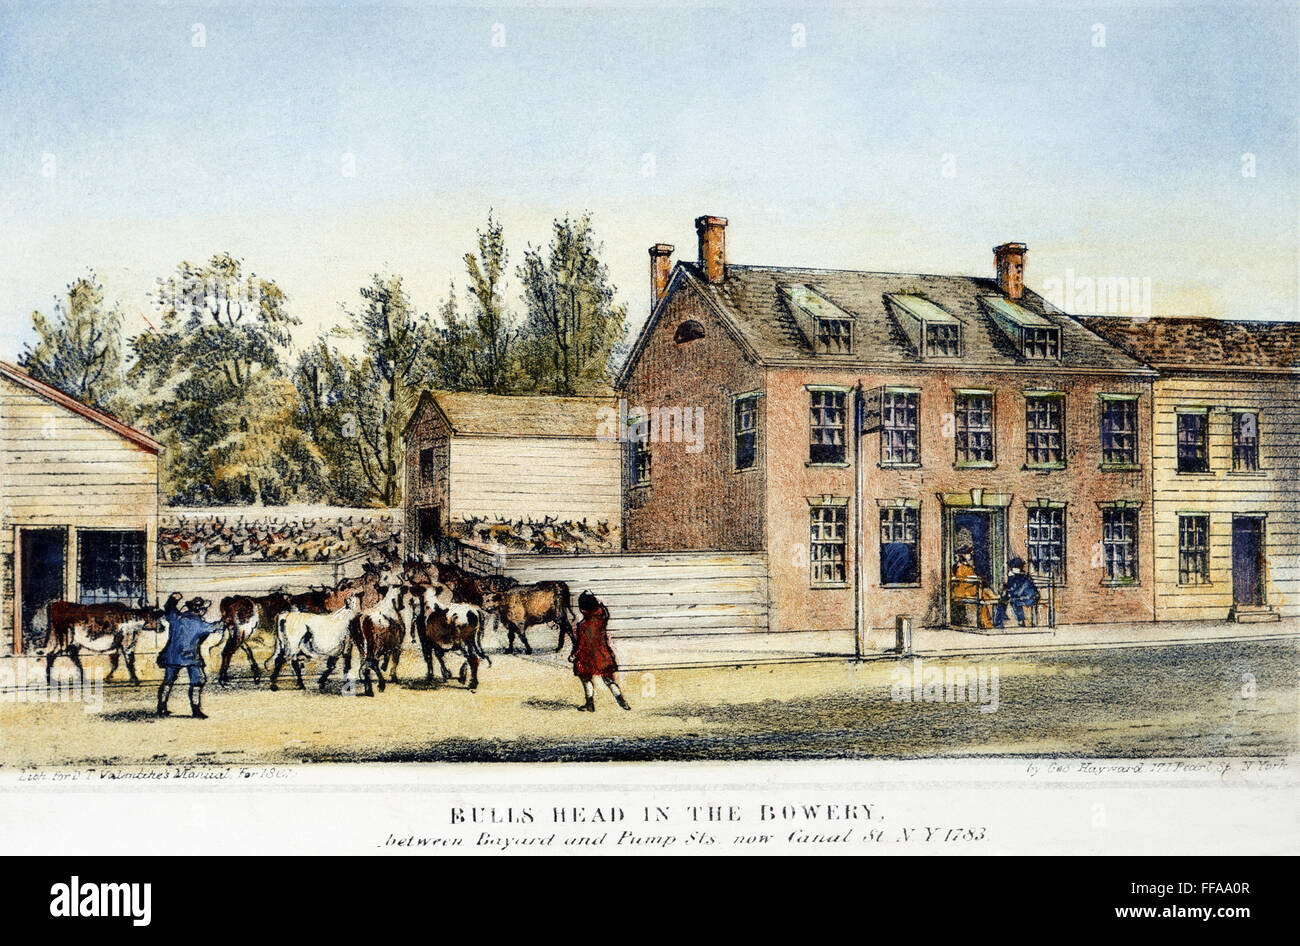 THE BOWERY, NEW YORK, 1783. /nThe Bull's Head Tavern in the Bowery, New York, as it appeared in 1783. Lithograph, 1861. Stock Photo